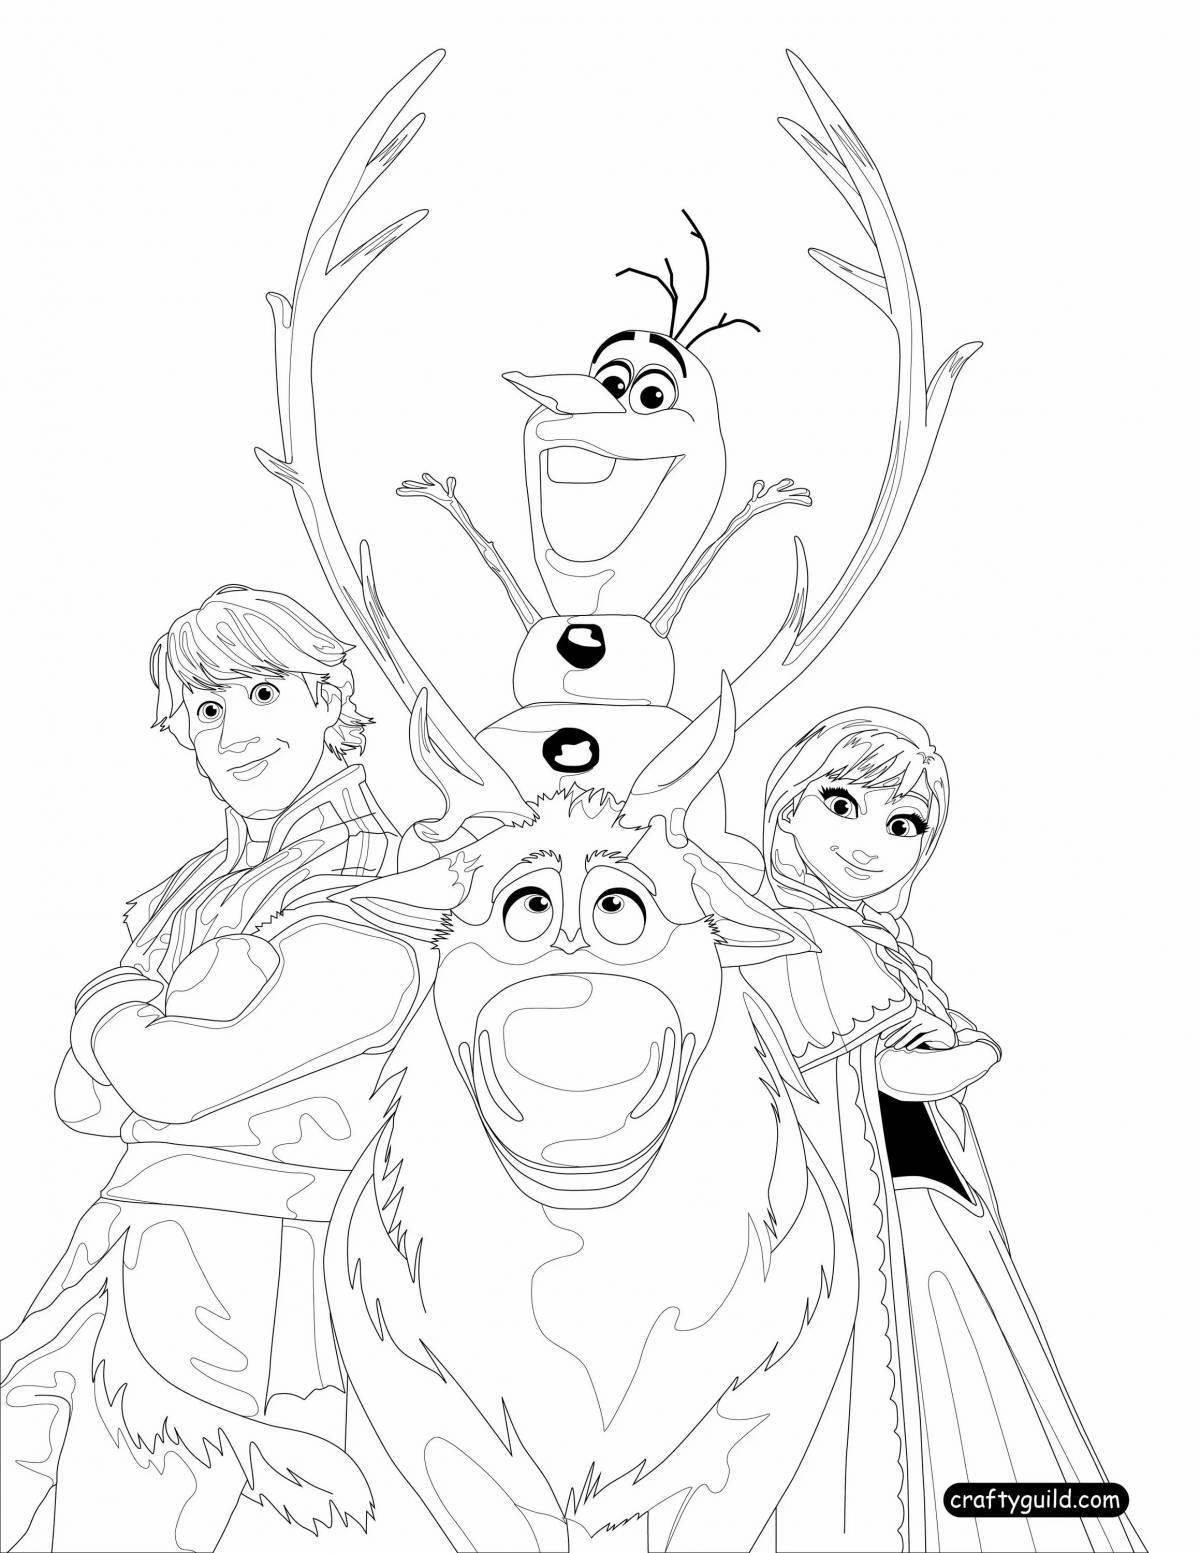 Delightful anna and olaf coloring pages